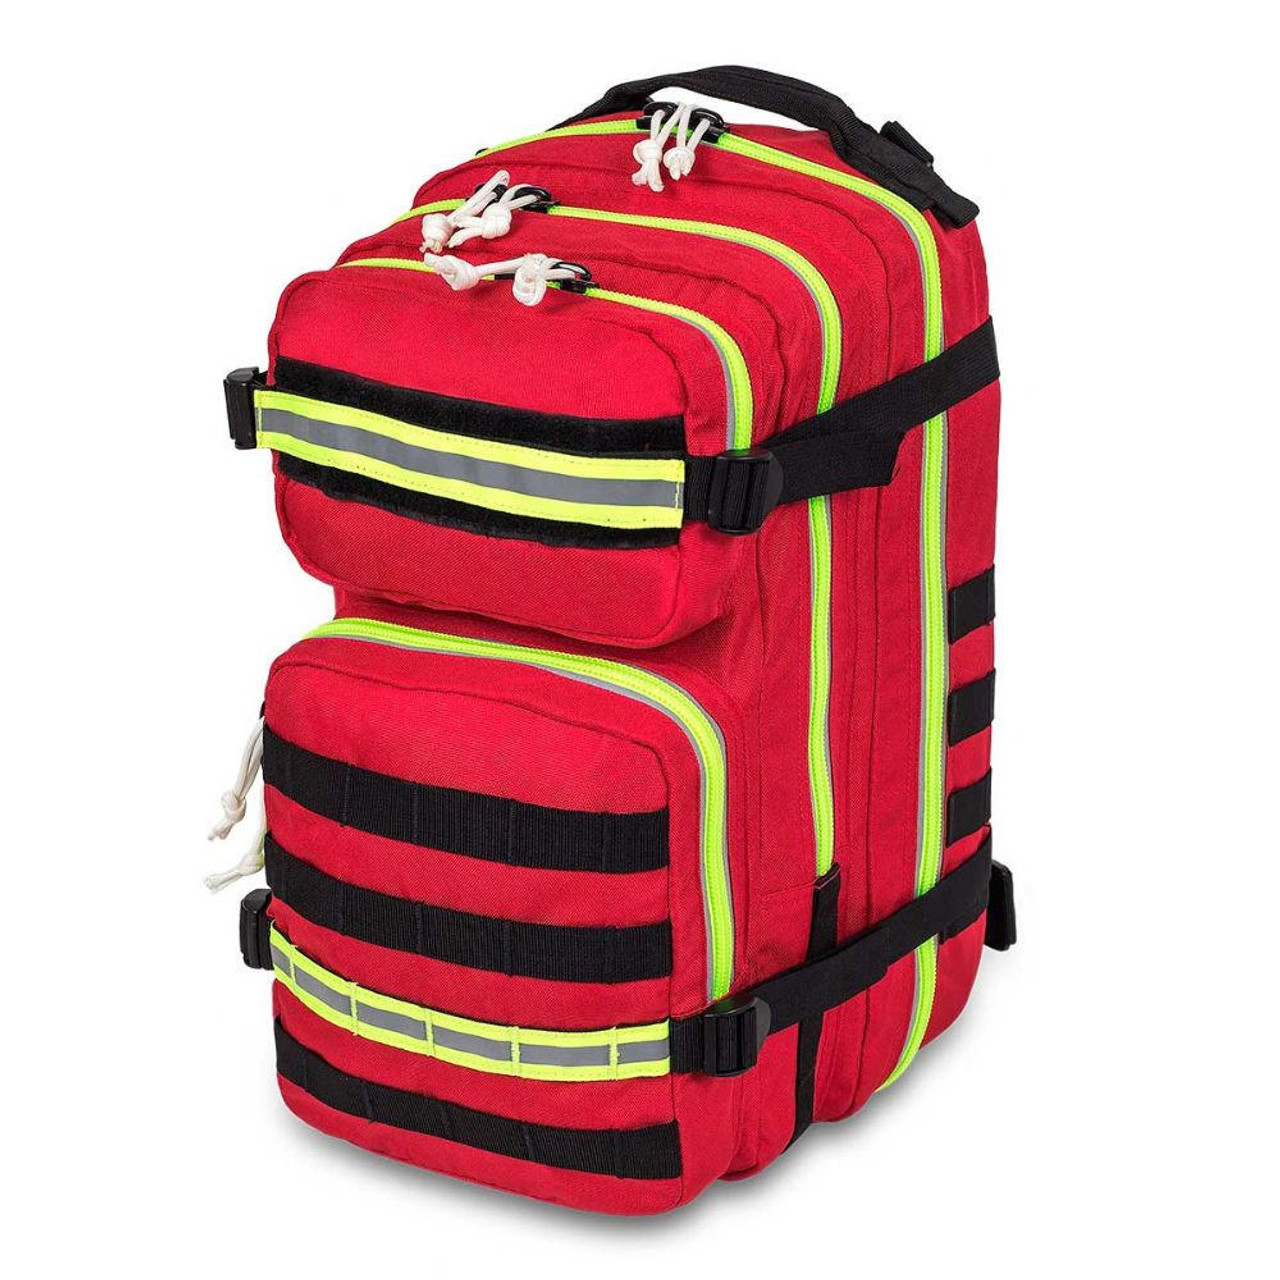  Compact Medical Backpack for Rapid Emergency Response Red 23 Litre 